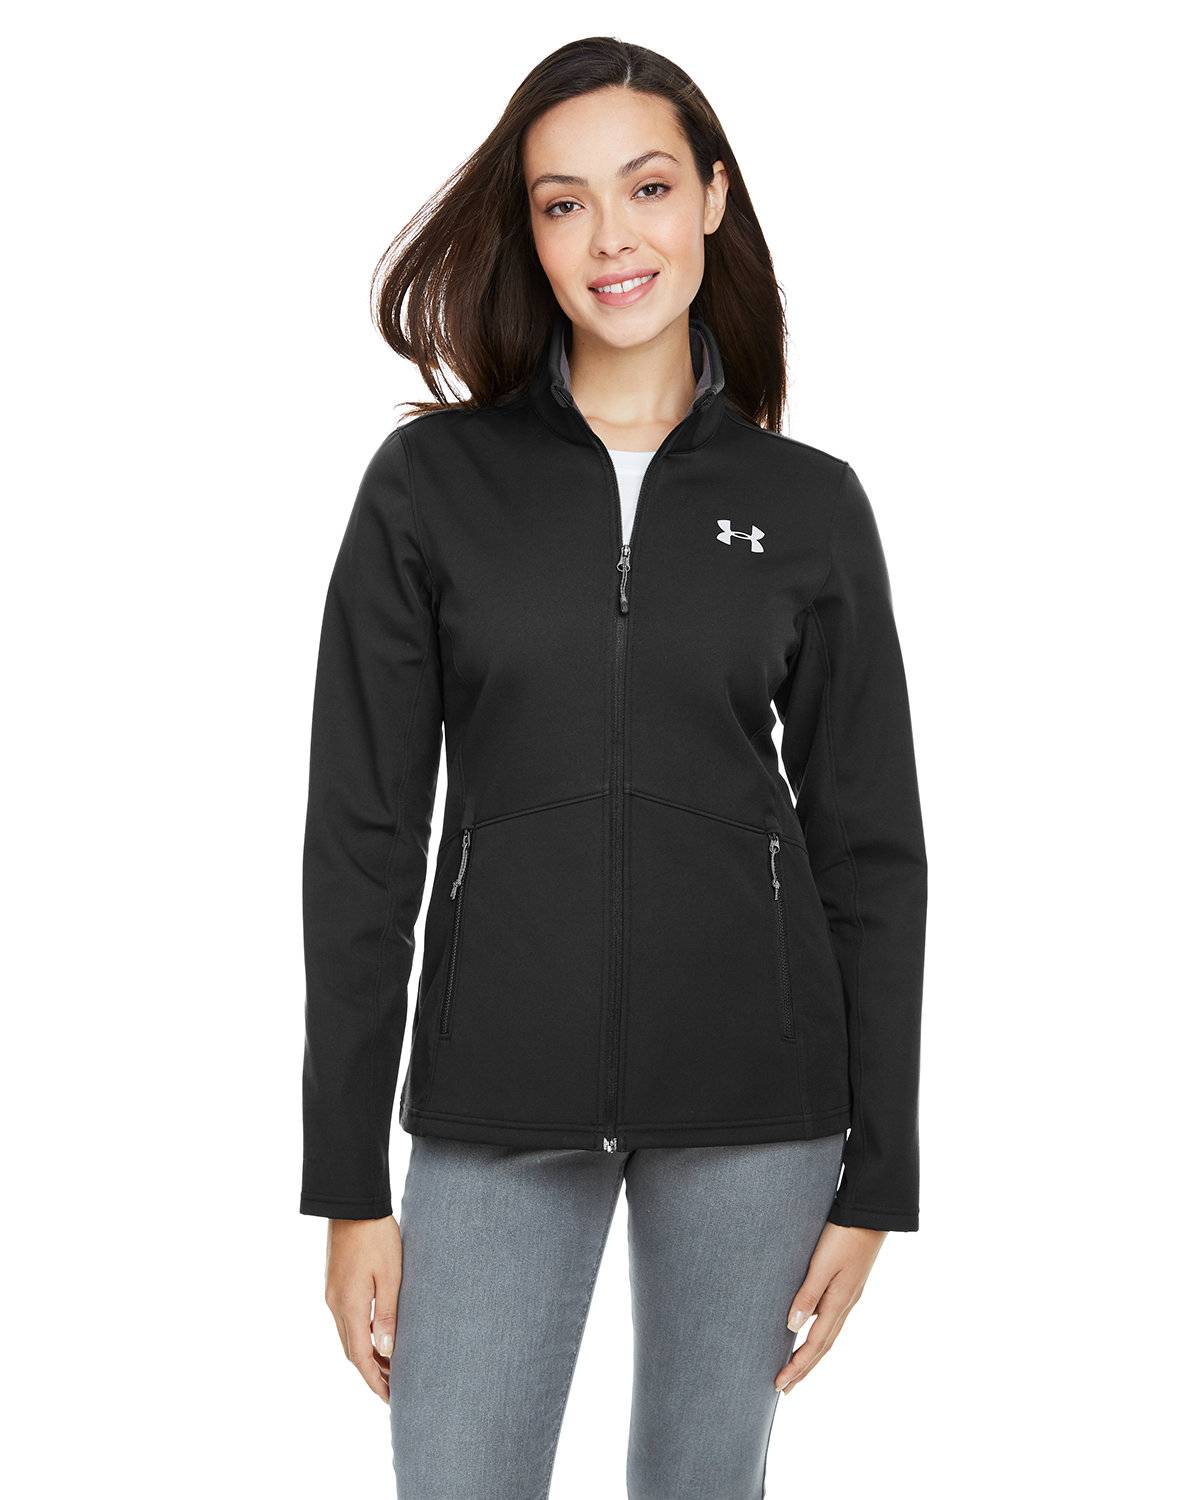 Under Armour 1321442 Ladies ColdGear Infrared Shield Jacket - Free Shipping  Available